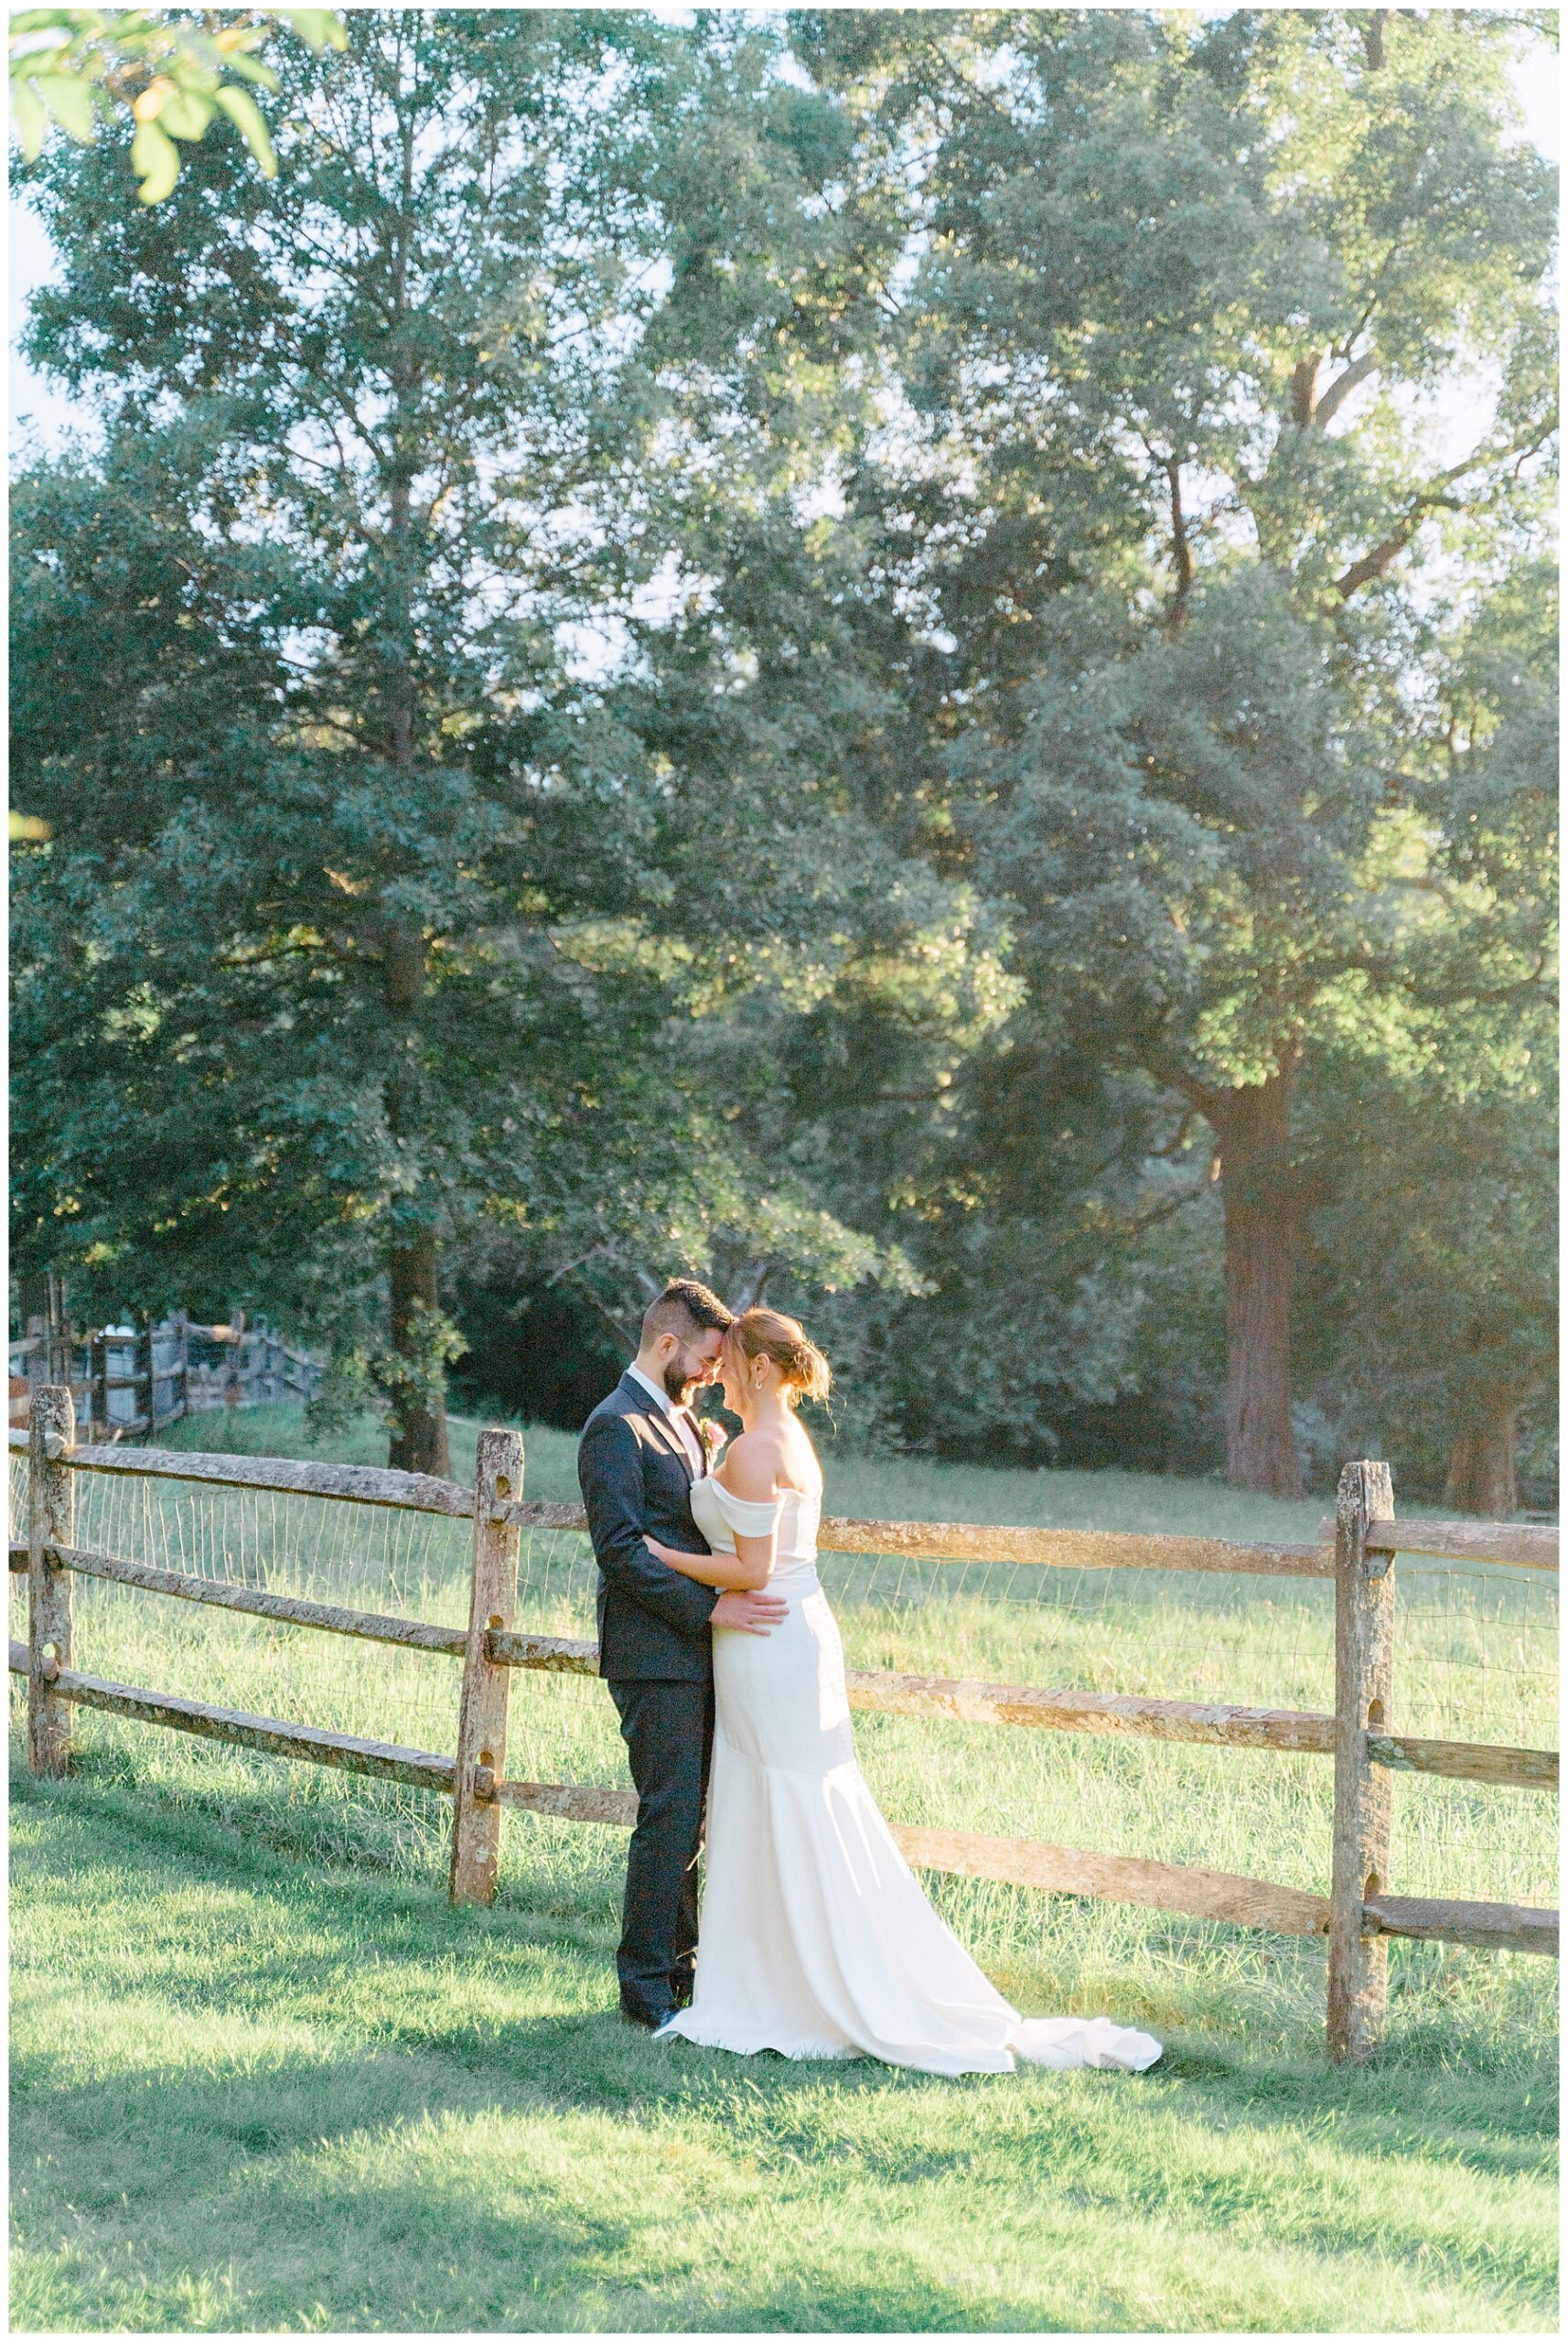 light and airy newlywed portraits from Summer Bradley Estate Wedding